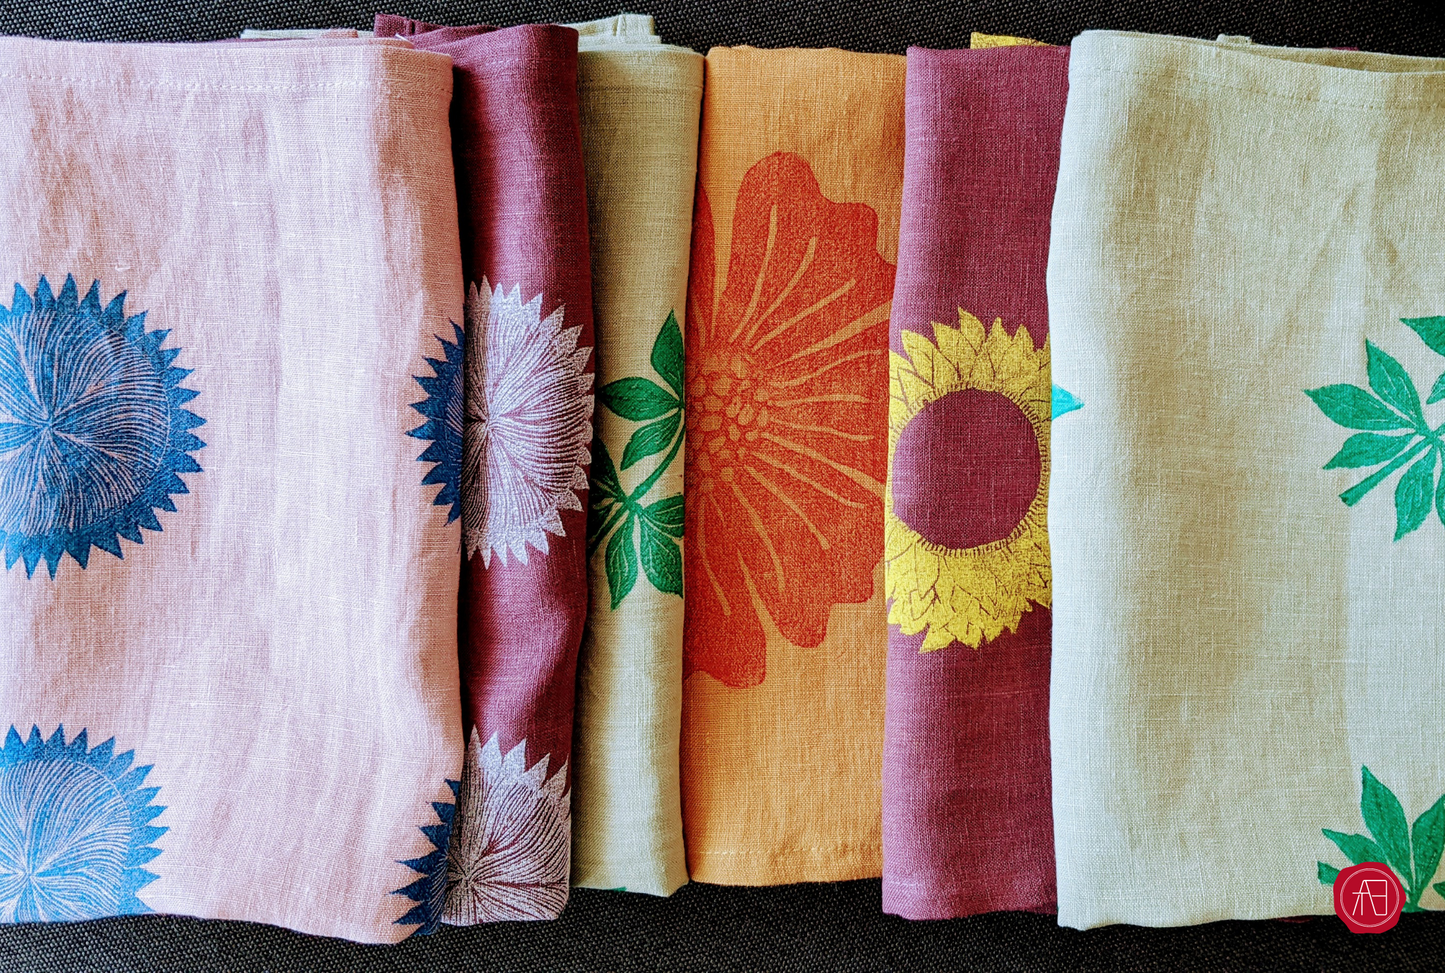 Block printed French flax linen kitchen towels